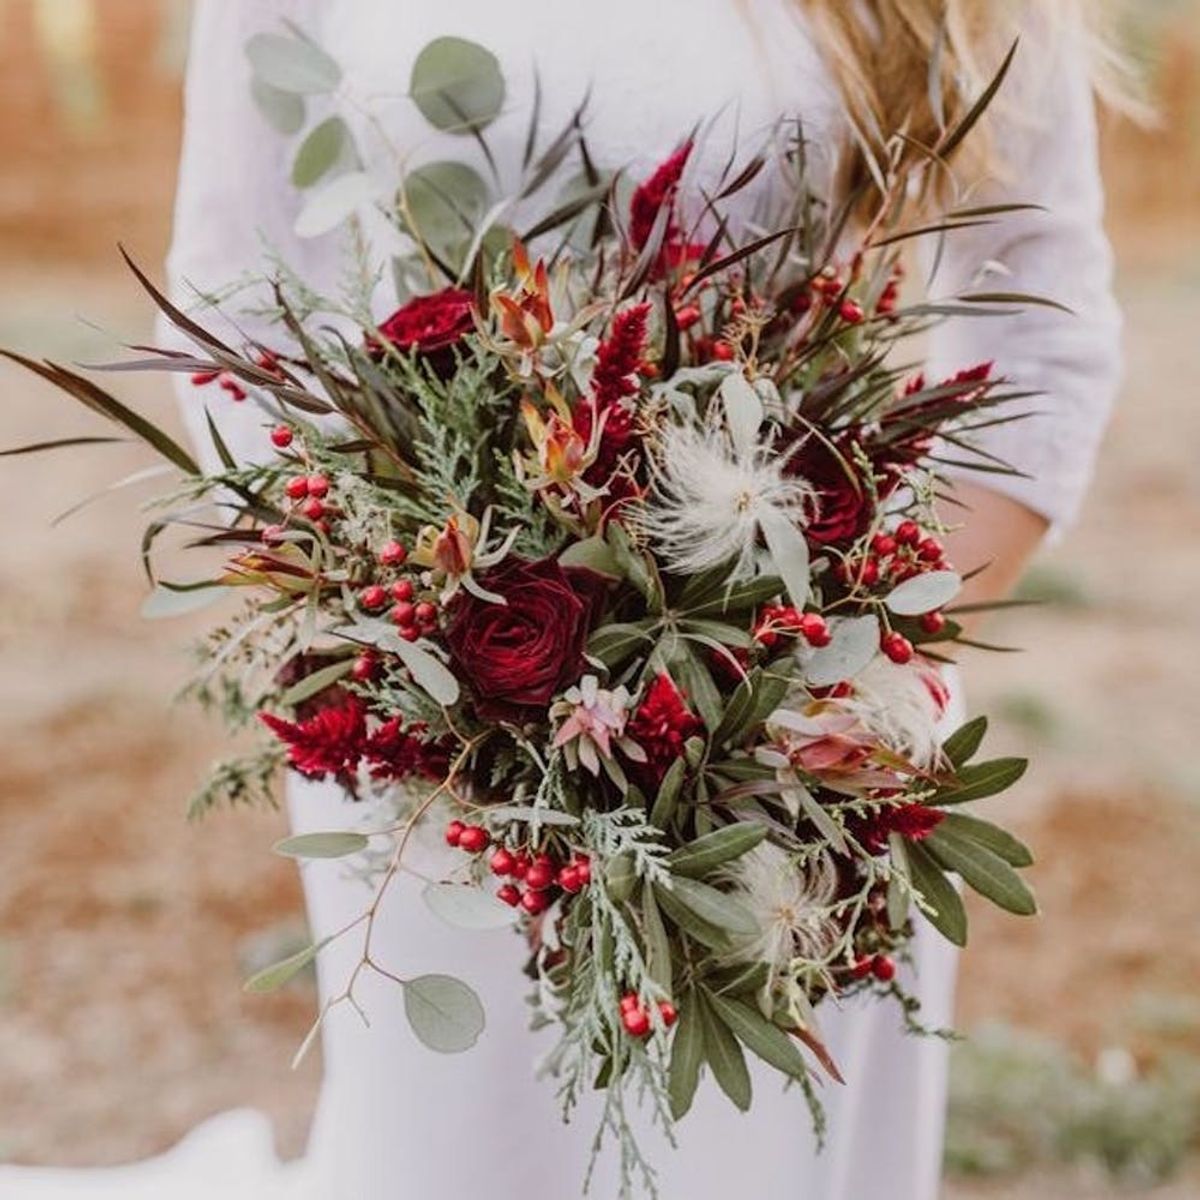 This Holiday-Inspired Shoot Will Convince You to Elope This Christmas